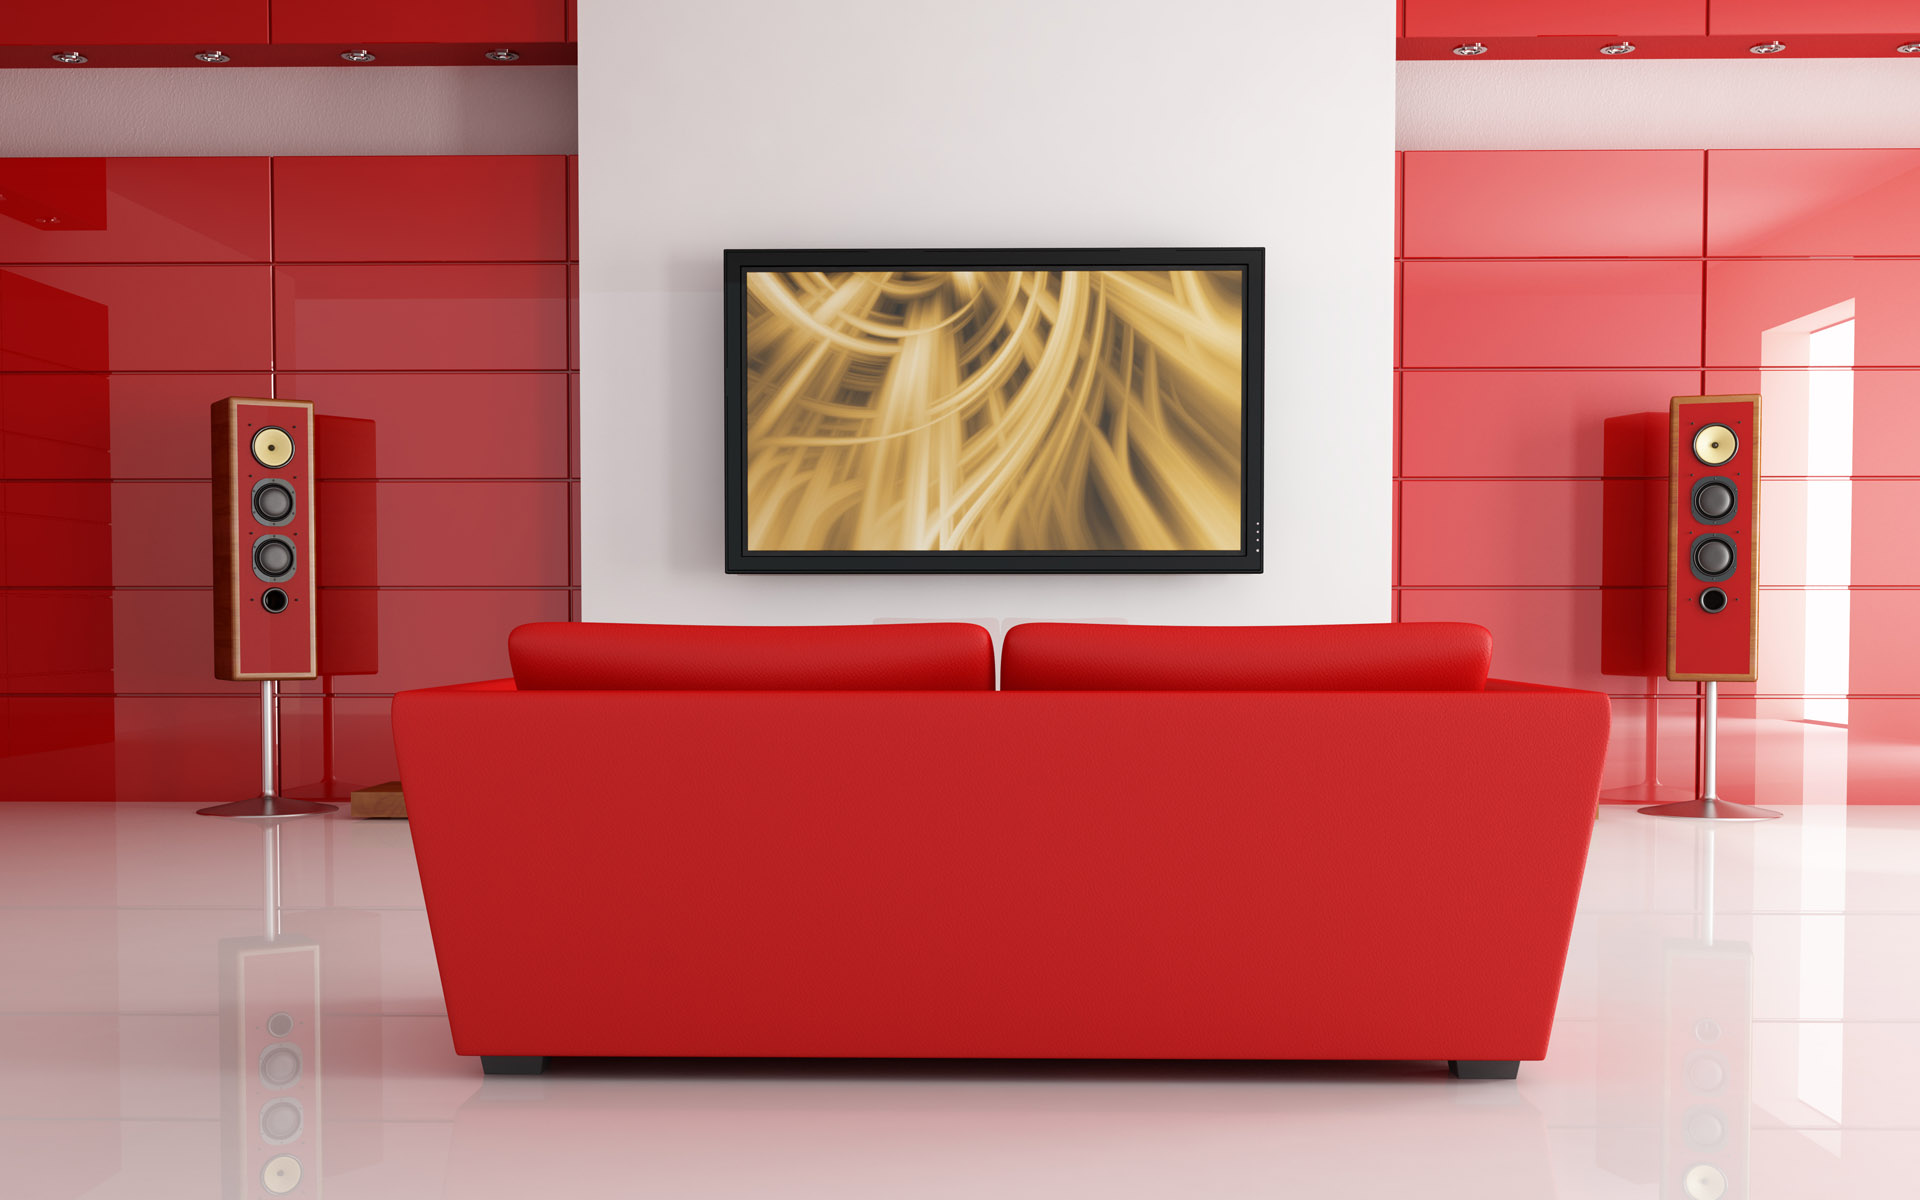 General 1920x1200 living rooms TV couch red speakers red couch white wall cushions frame